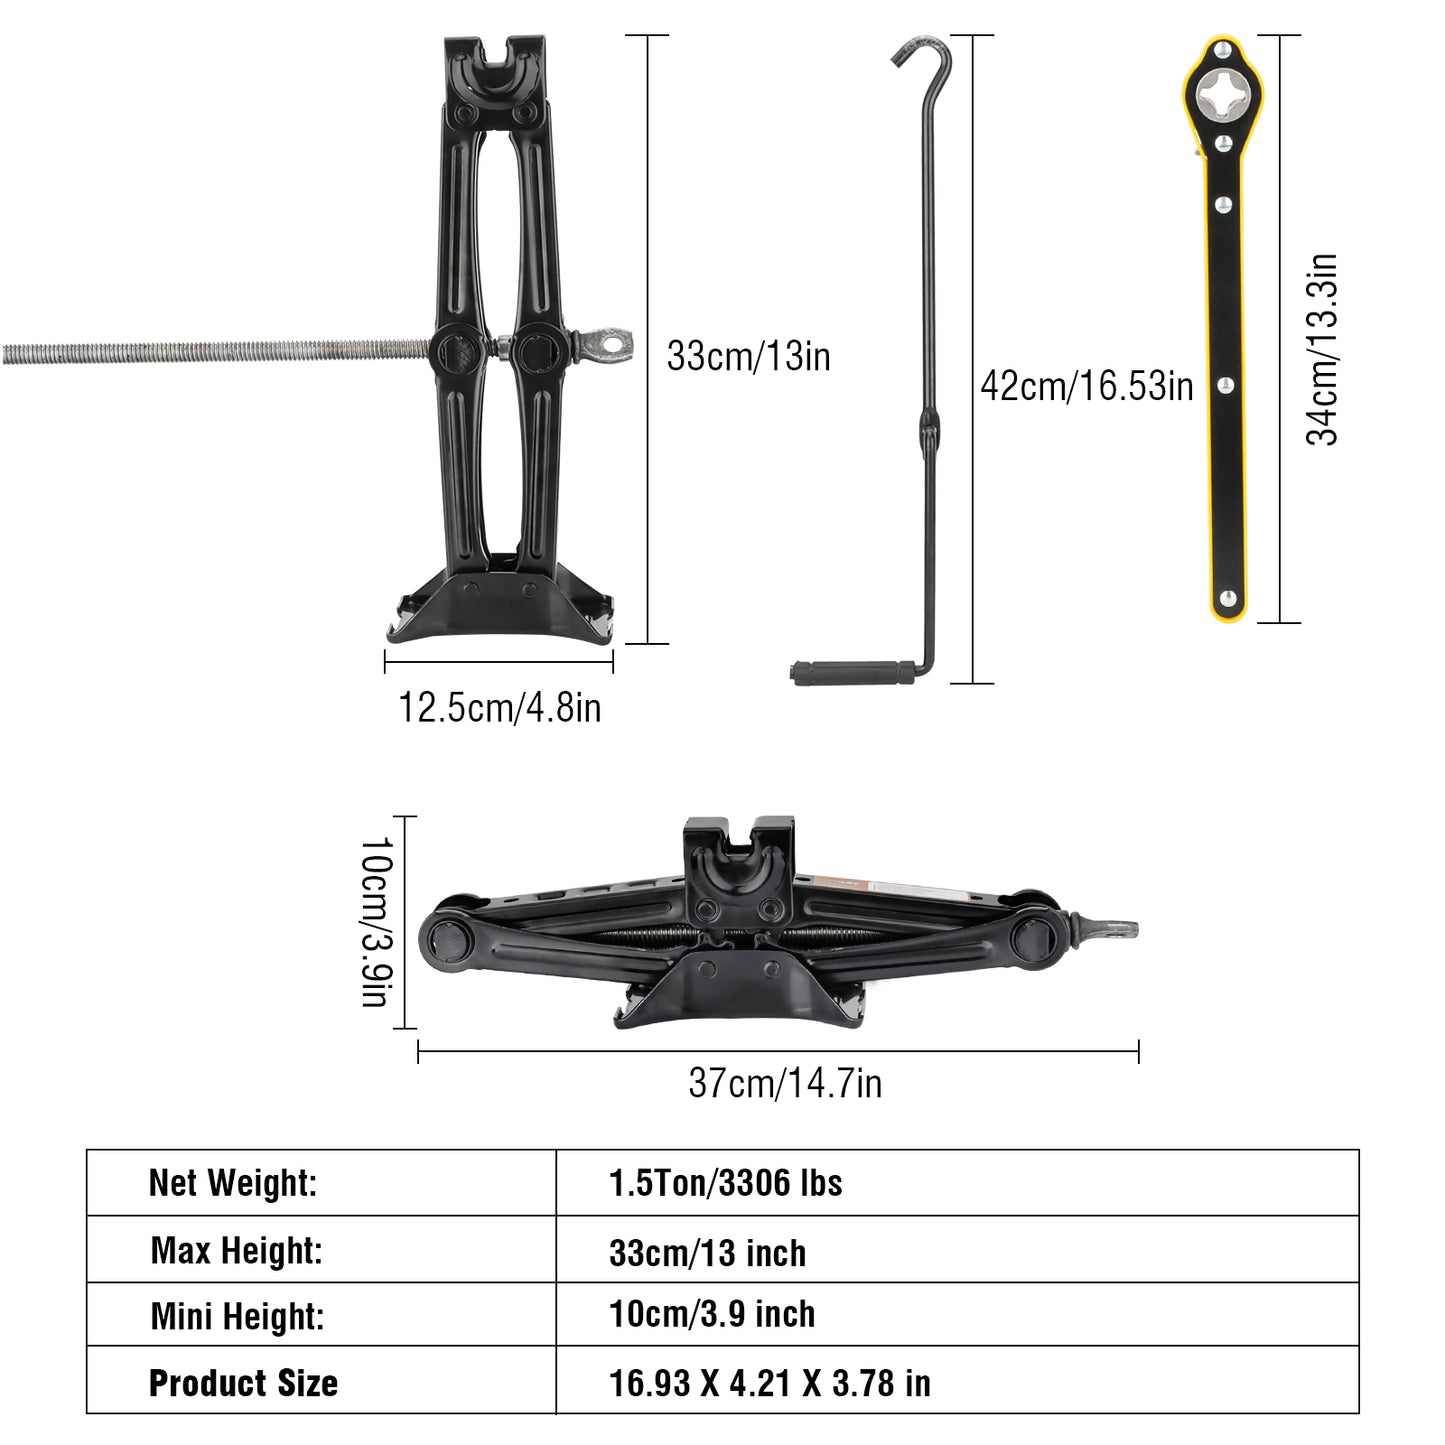 1.5 Ton (3306 lbs) Scissor Jack Kit - Quick Lift for Tire Changes, Compatible with Autos, SUVs, and MPVs